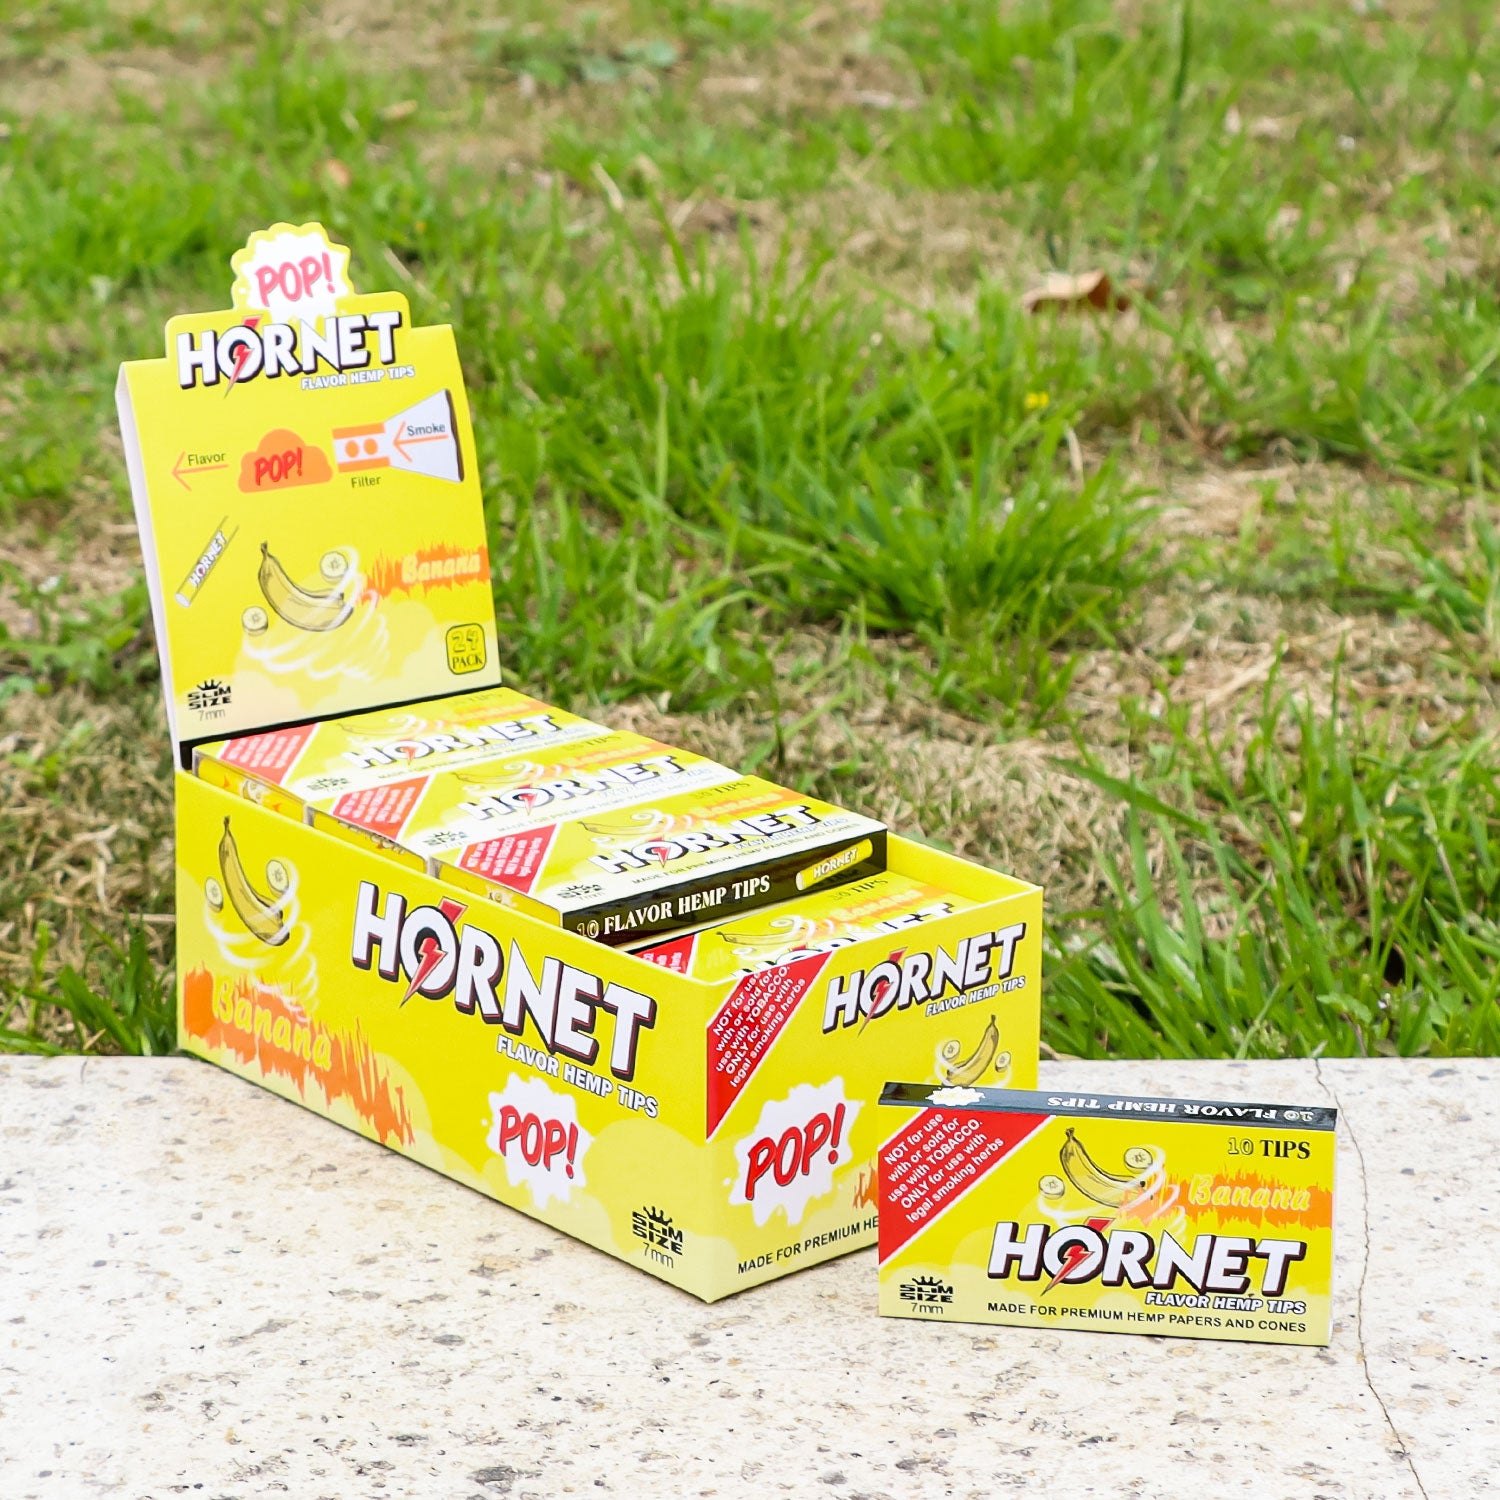 Hornet Banana Flavors Filter Tips with Flavored Pop, 7 mm Filter Tips, 10 Tips / Pack 24 Packs / Box